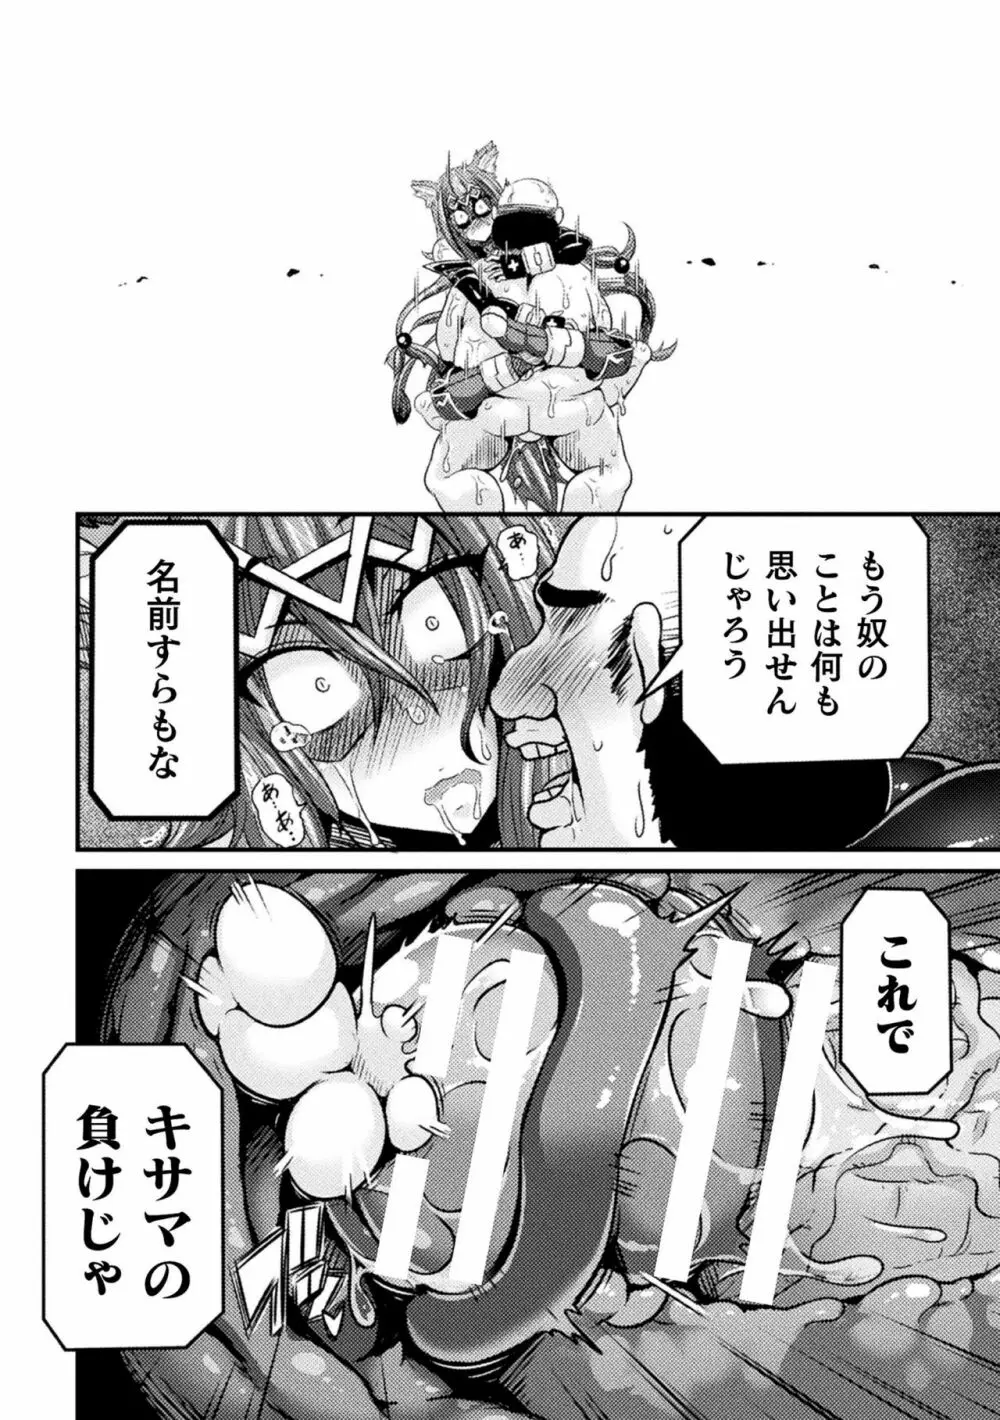 LOVE METER〜寝取られた相棒〜 #2 Page.20